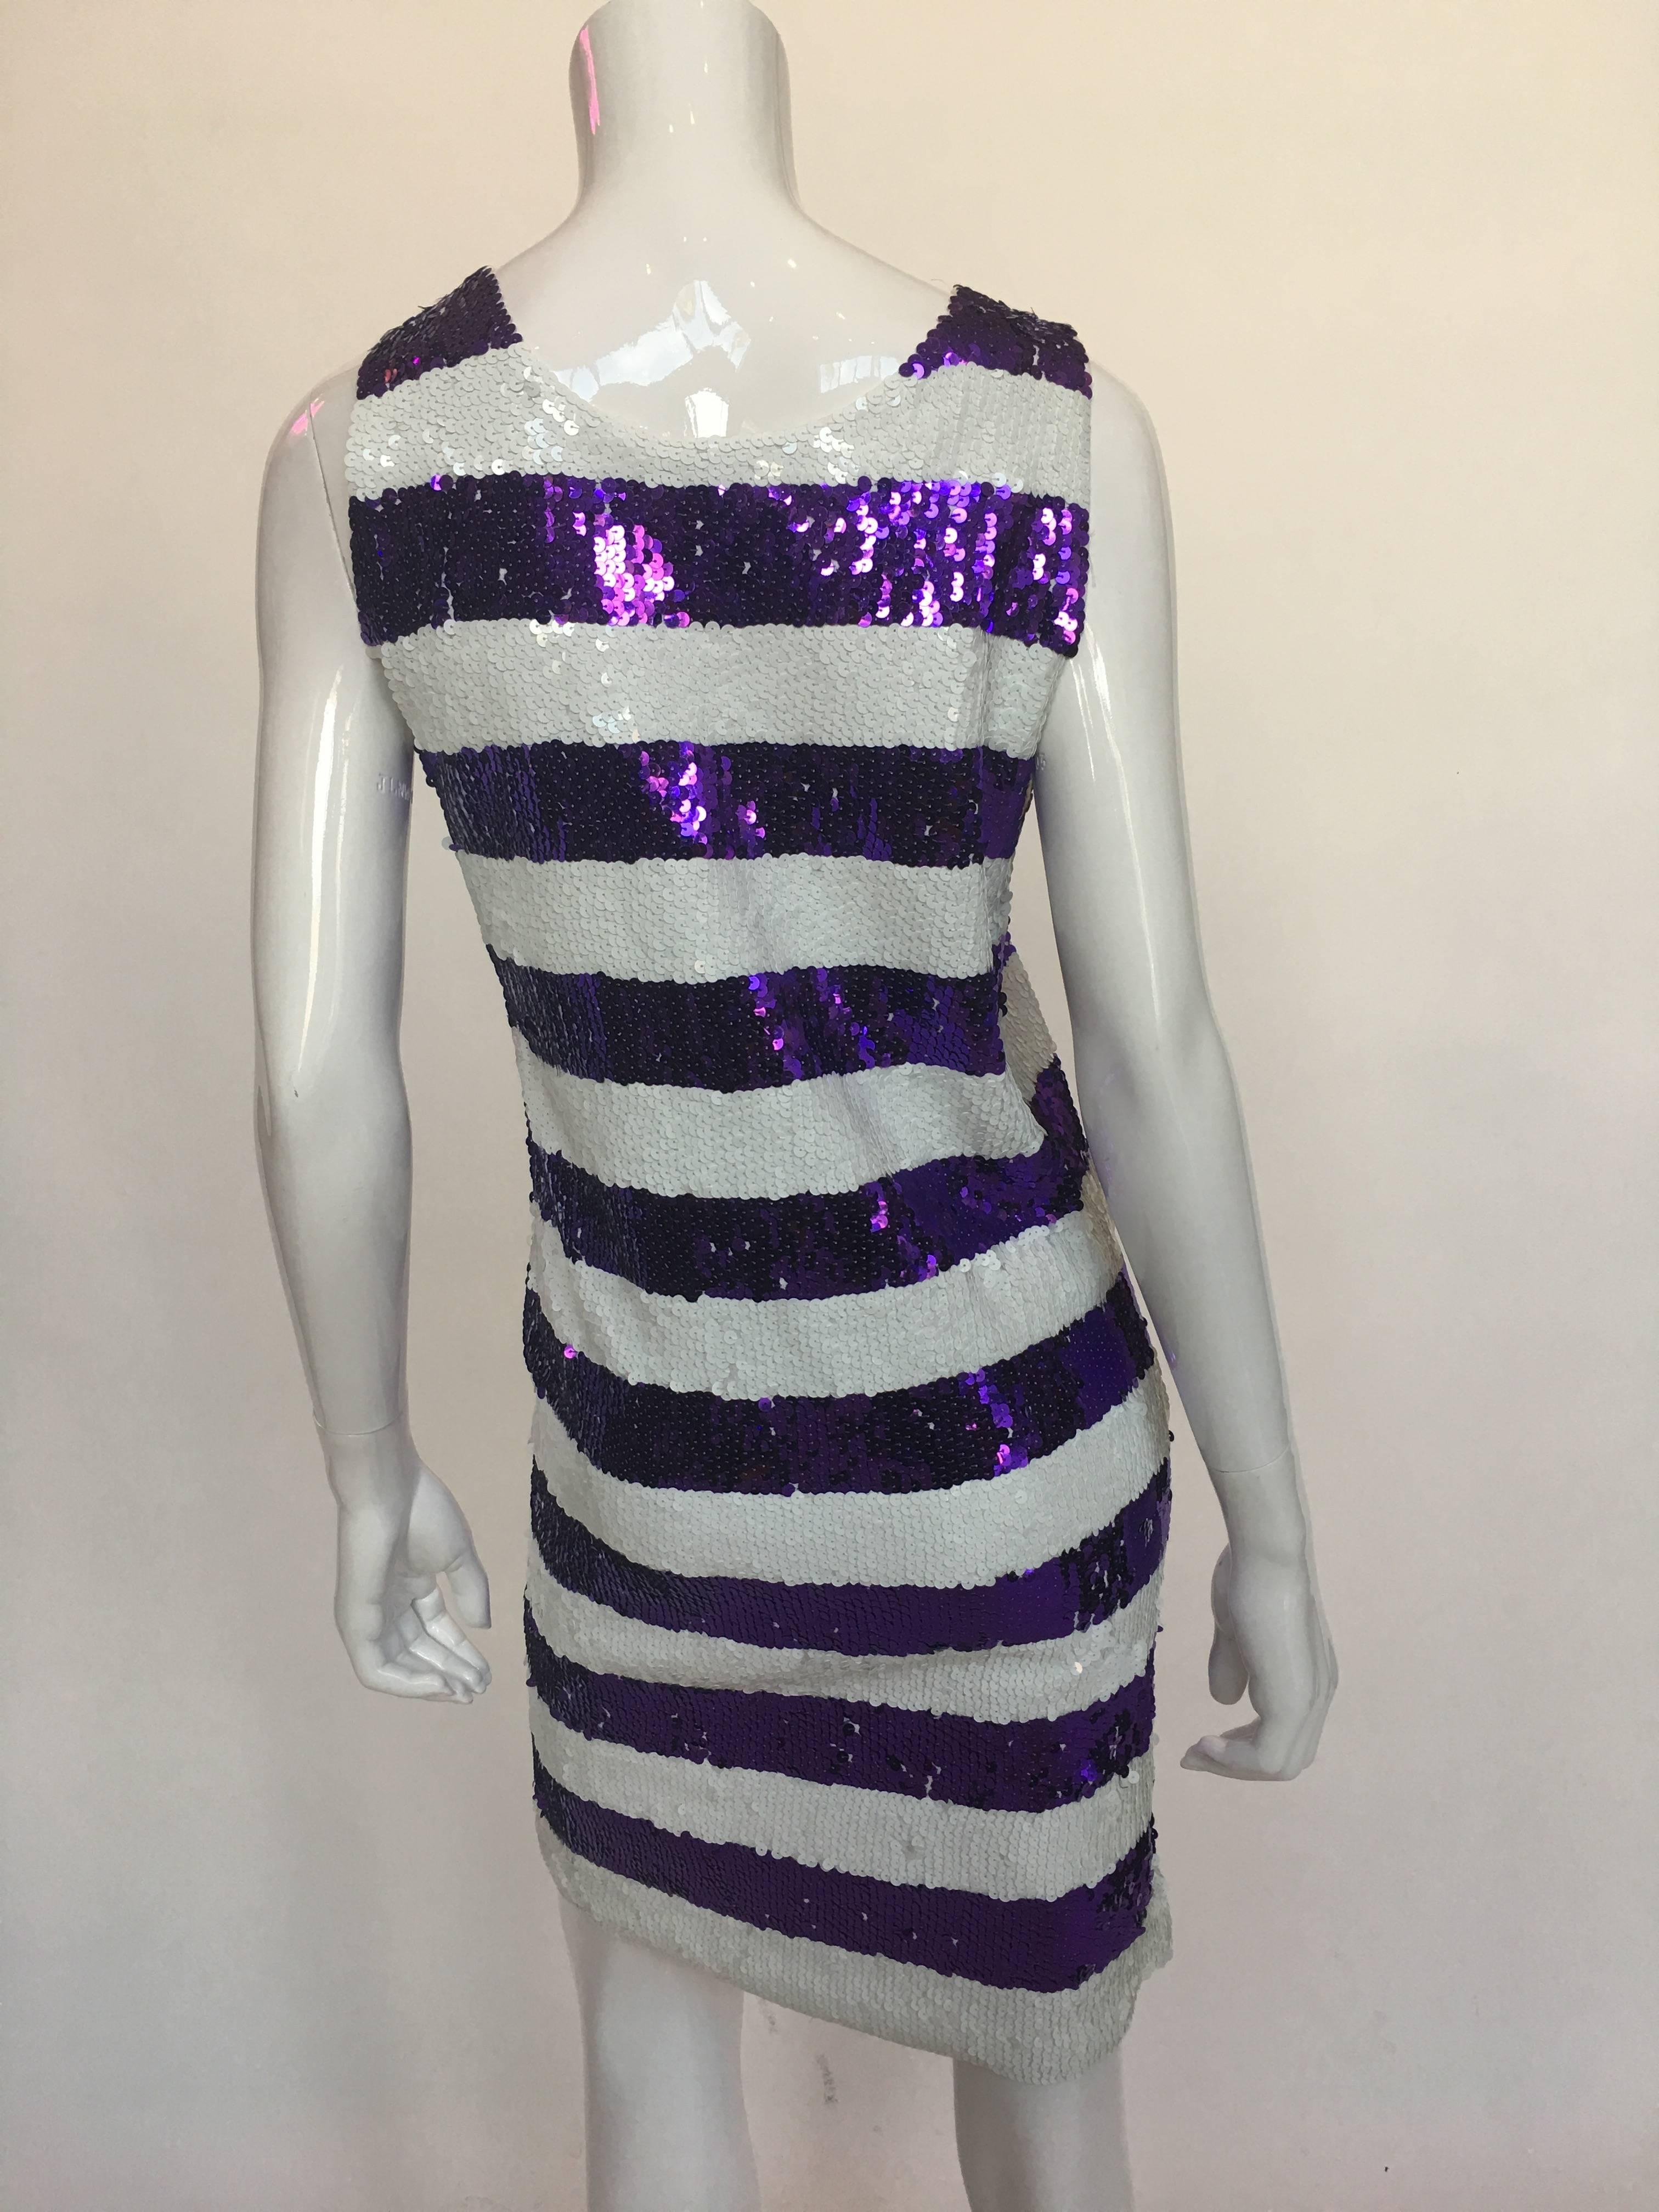 Gene Ewing Sequin Purple and White Striped Shift Dress
Sample Dress

Front neck to hem - 31 1/2 in.
Back neck to hem - 32 in.
Armpit to armpit - 18 in.
Waist - 17 in.